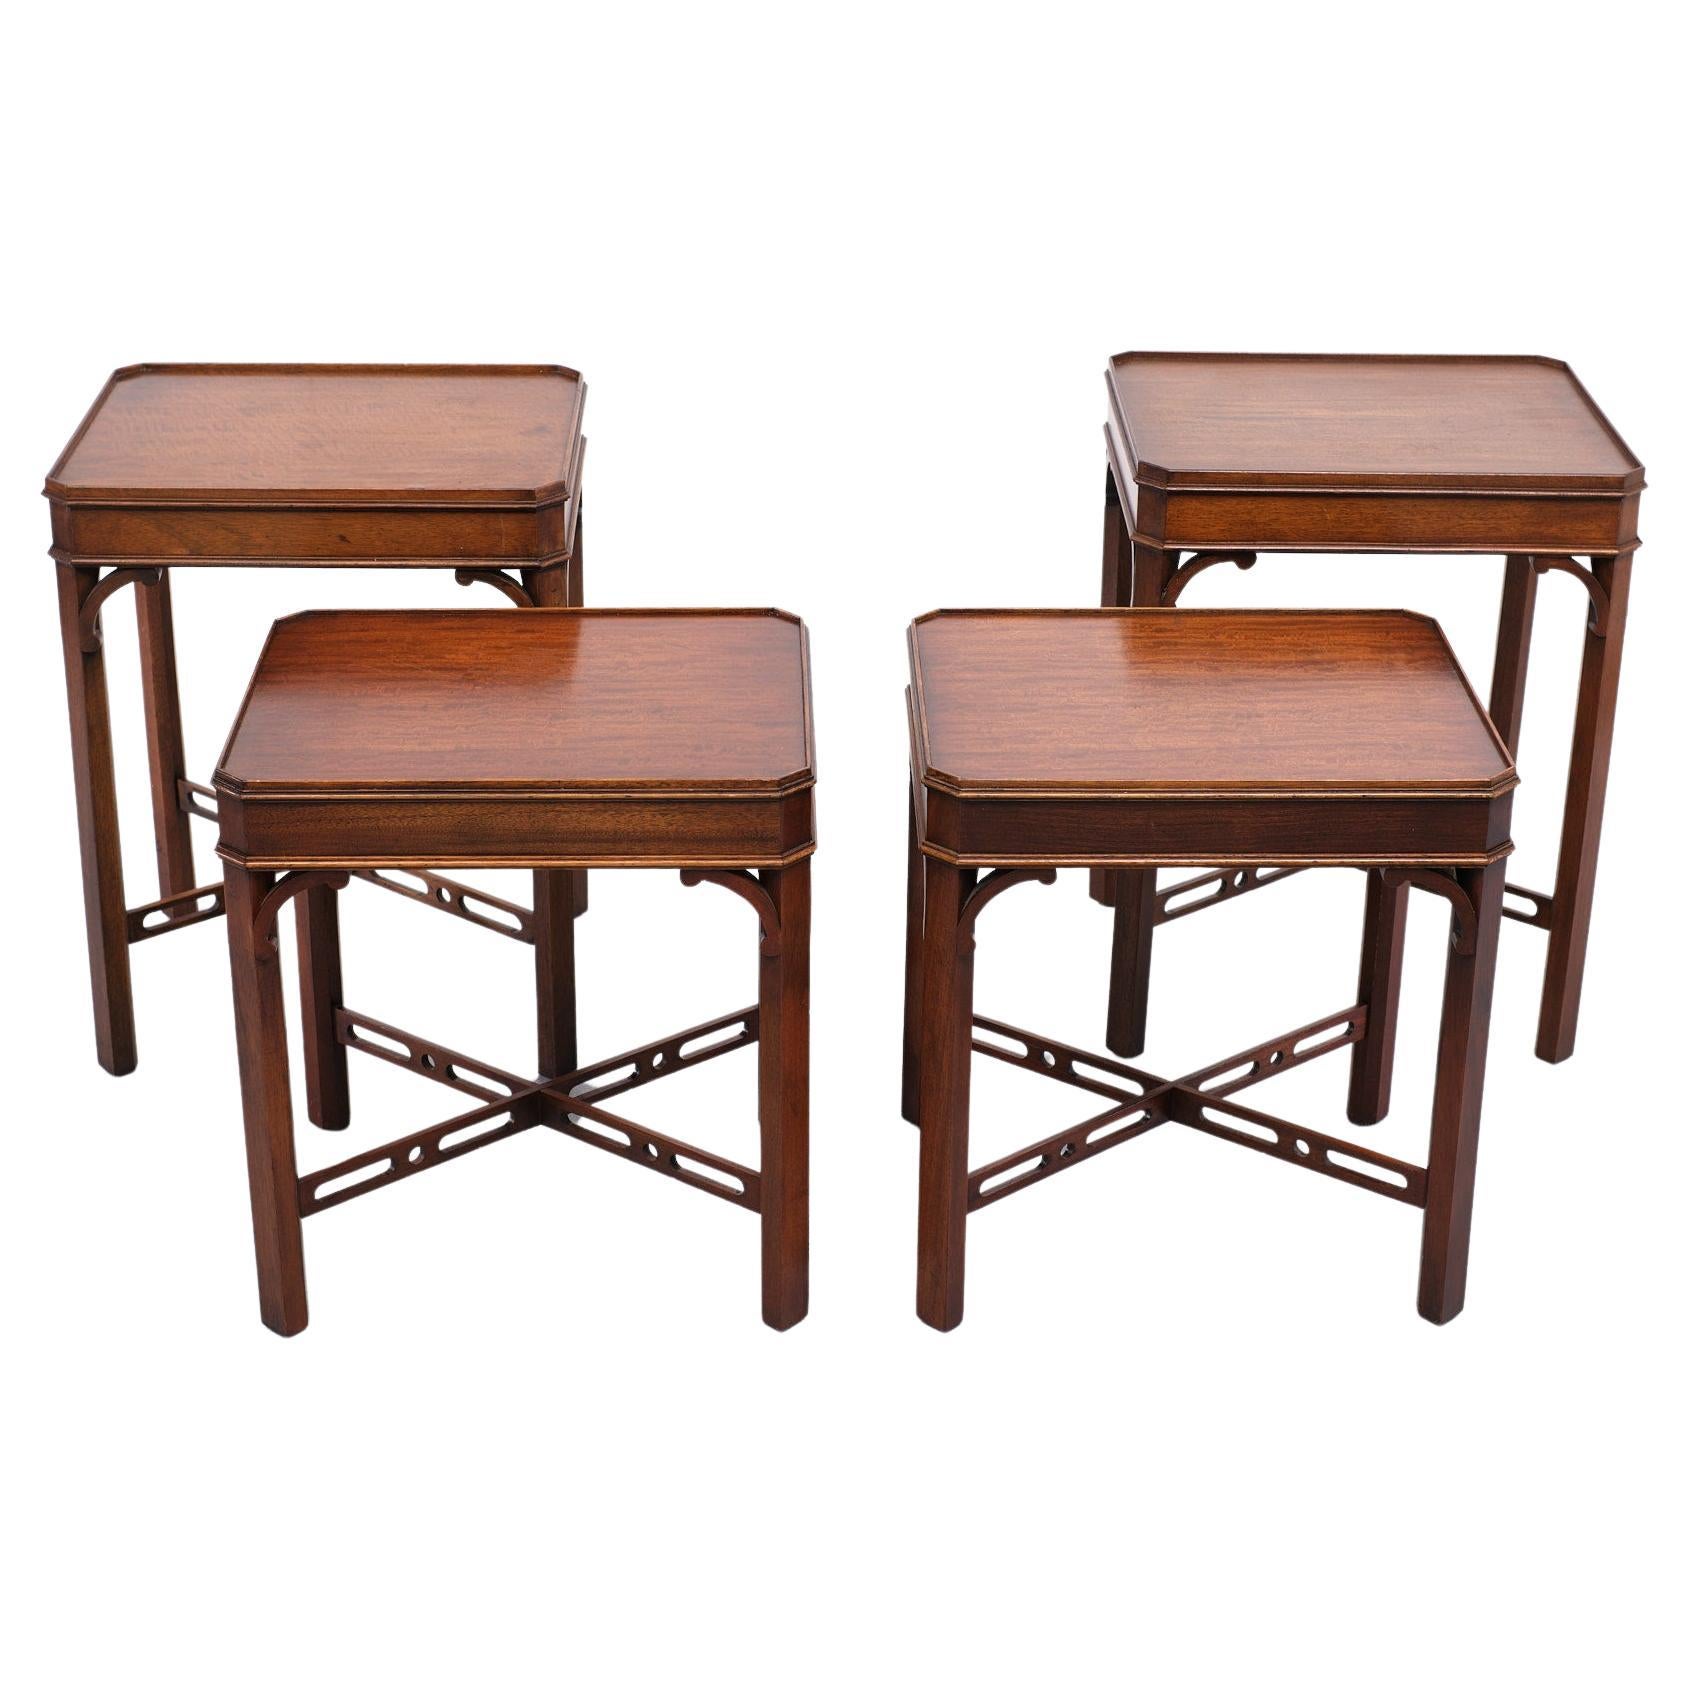 Bevan Funnell Mahogany Side Tables Georgian Revival England, 1960s For Sale